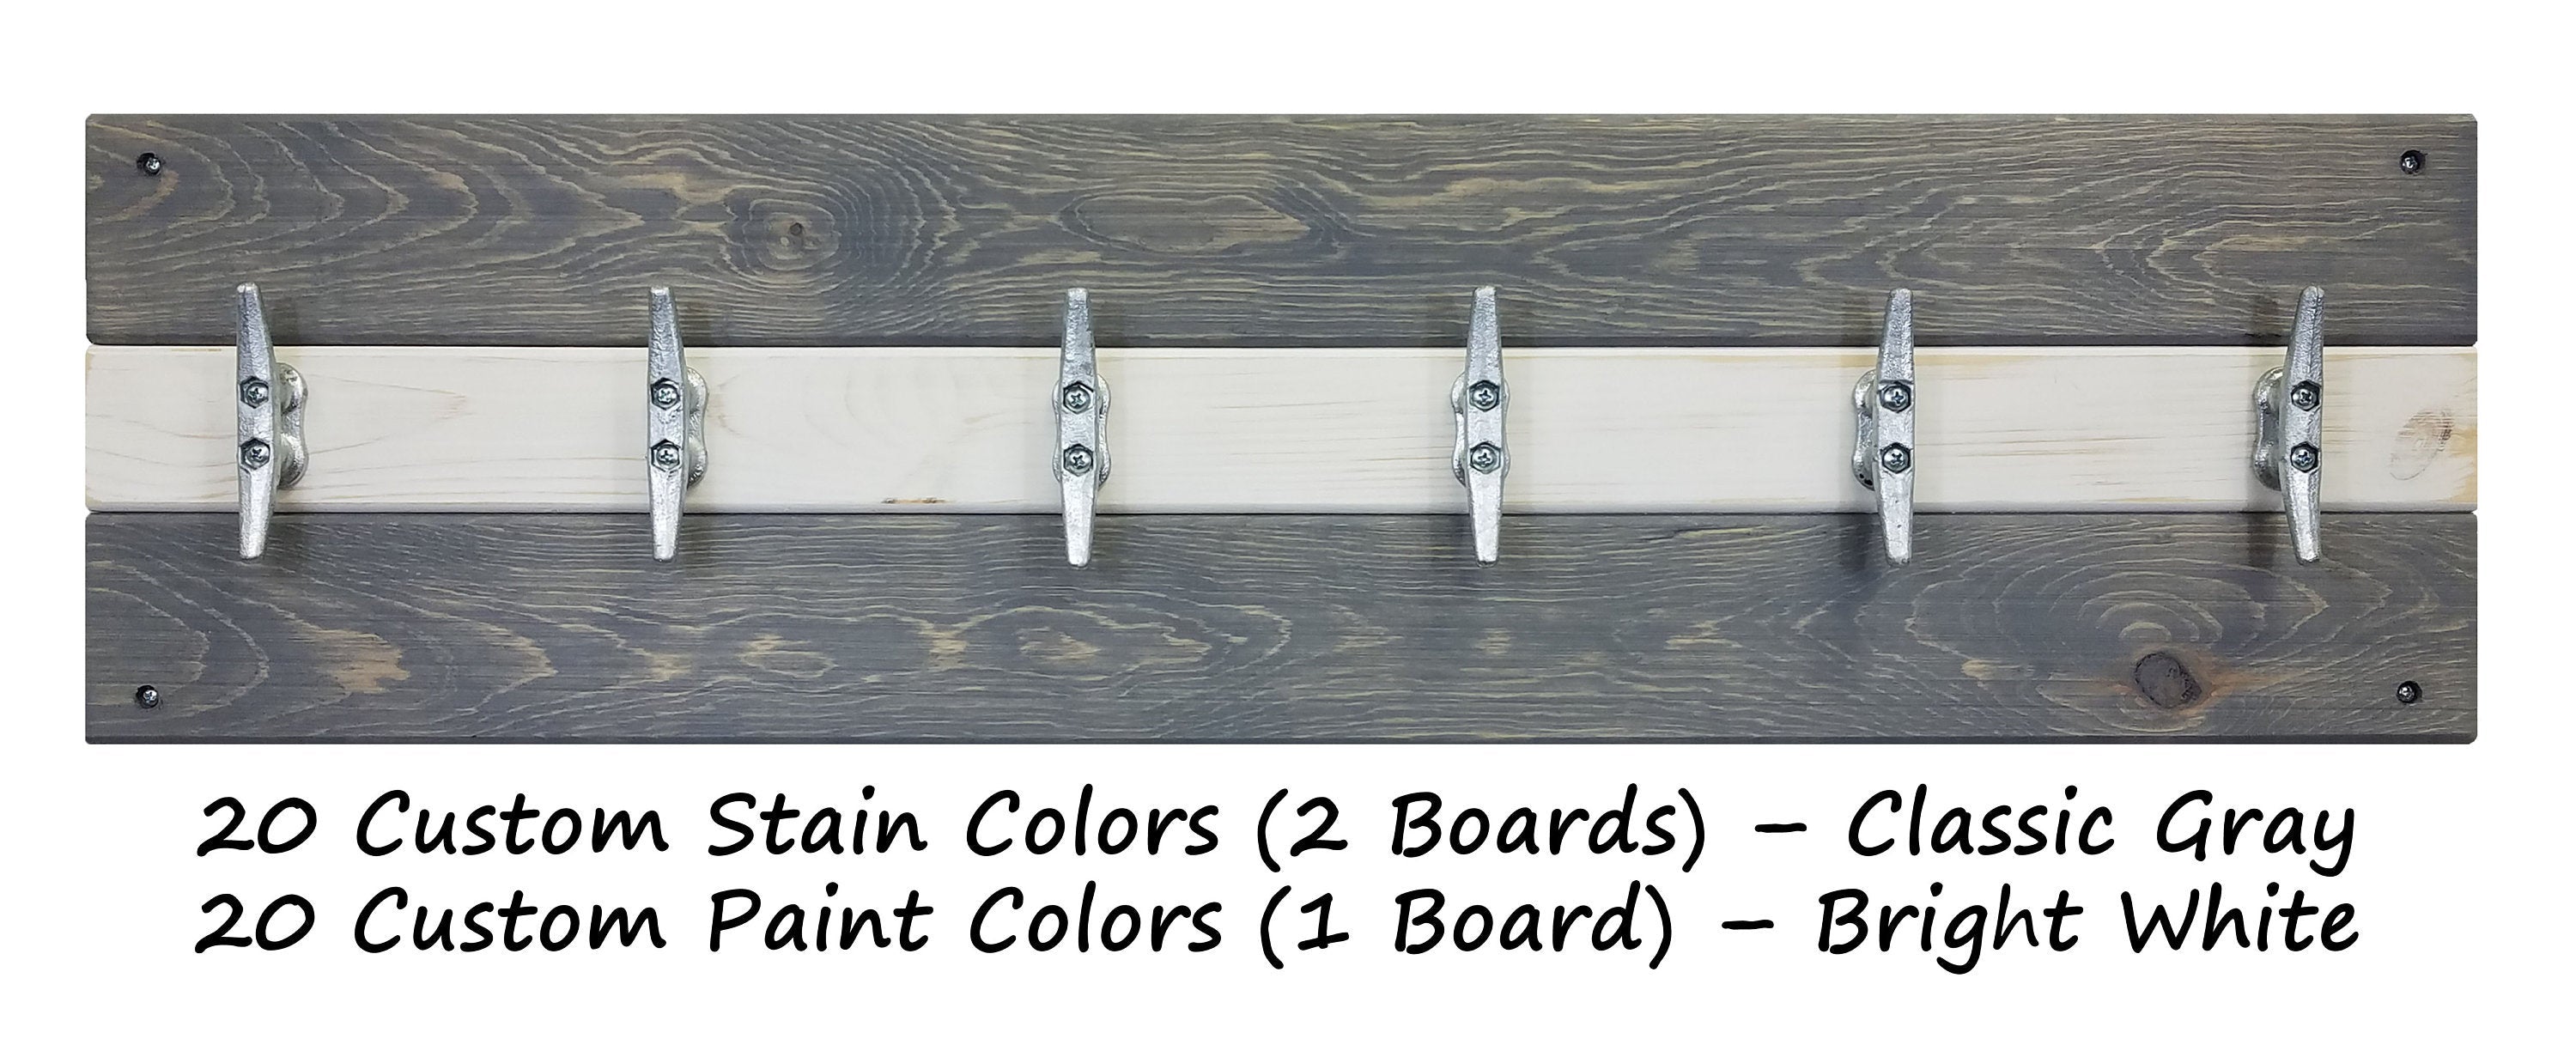 Cape May Boat Cleat Wall Hooks - 400 Color Combinations, Shown in Classic Gray & Bright Ivory White